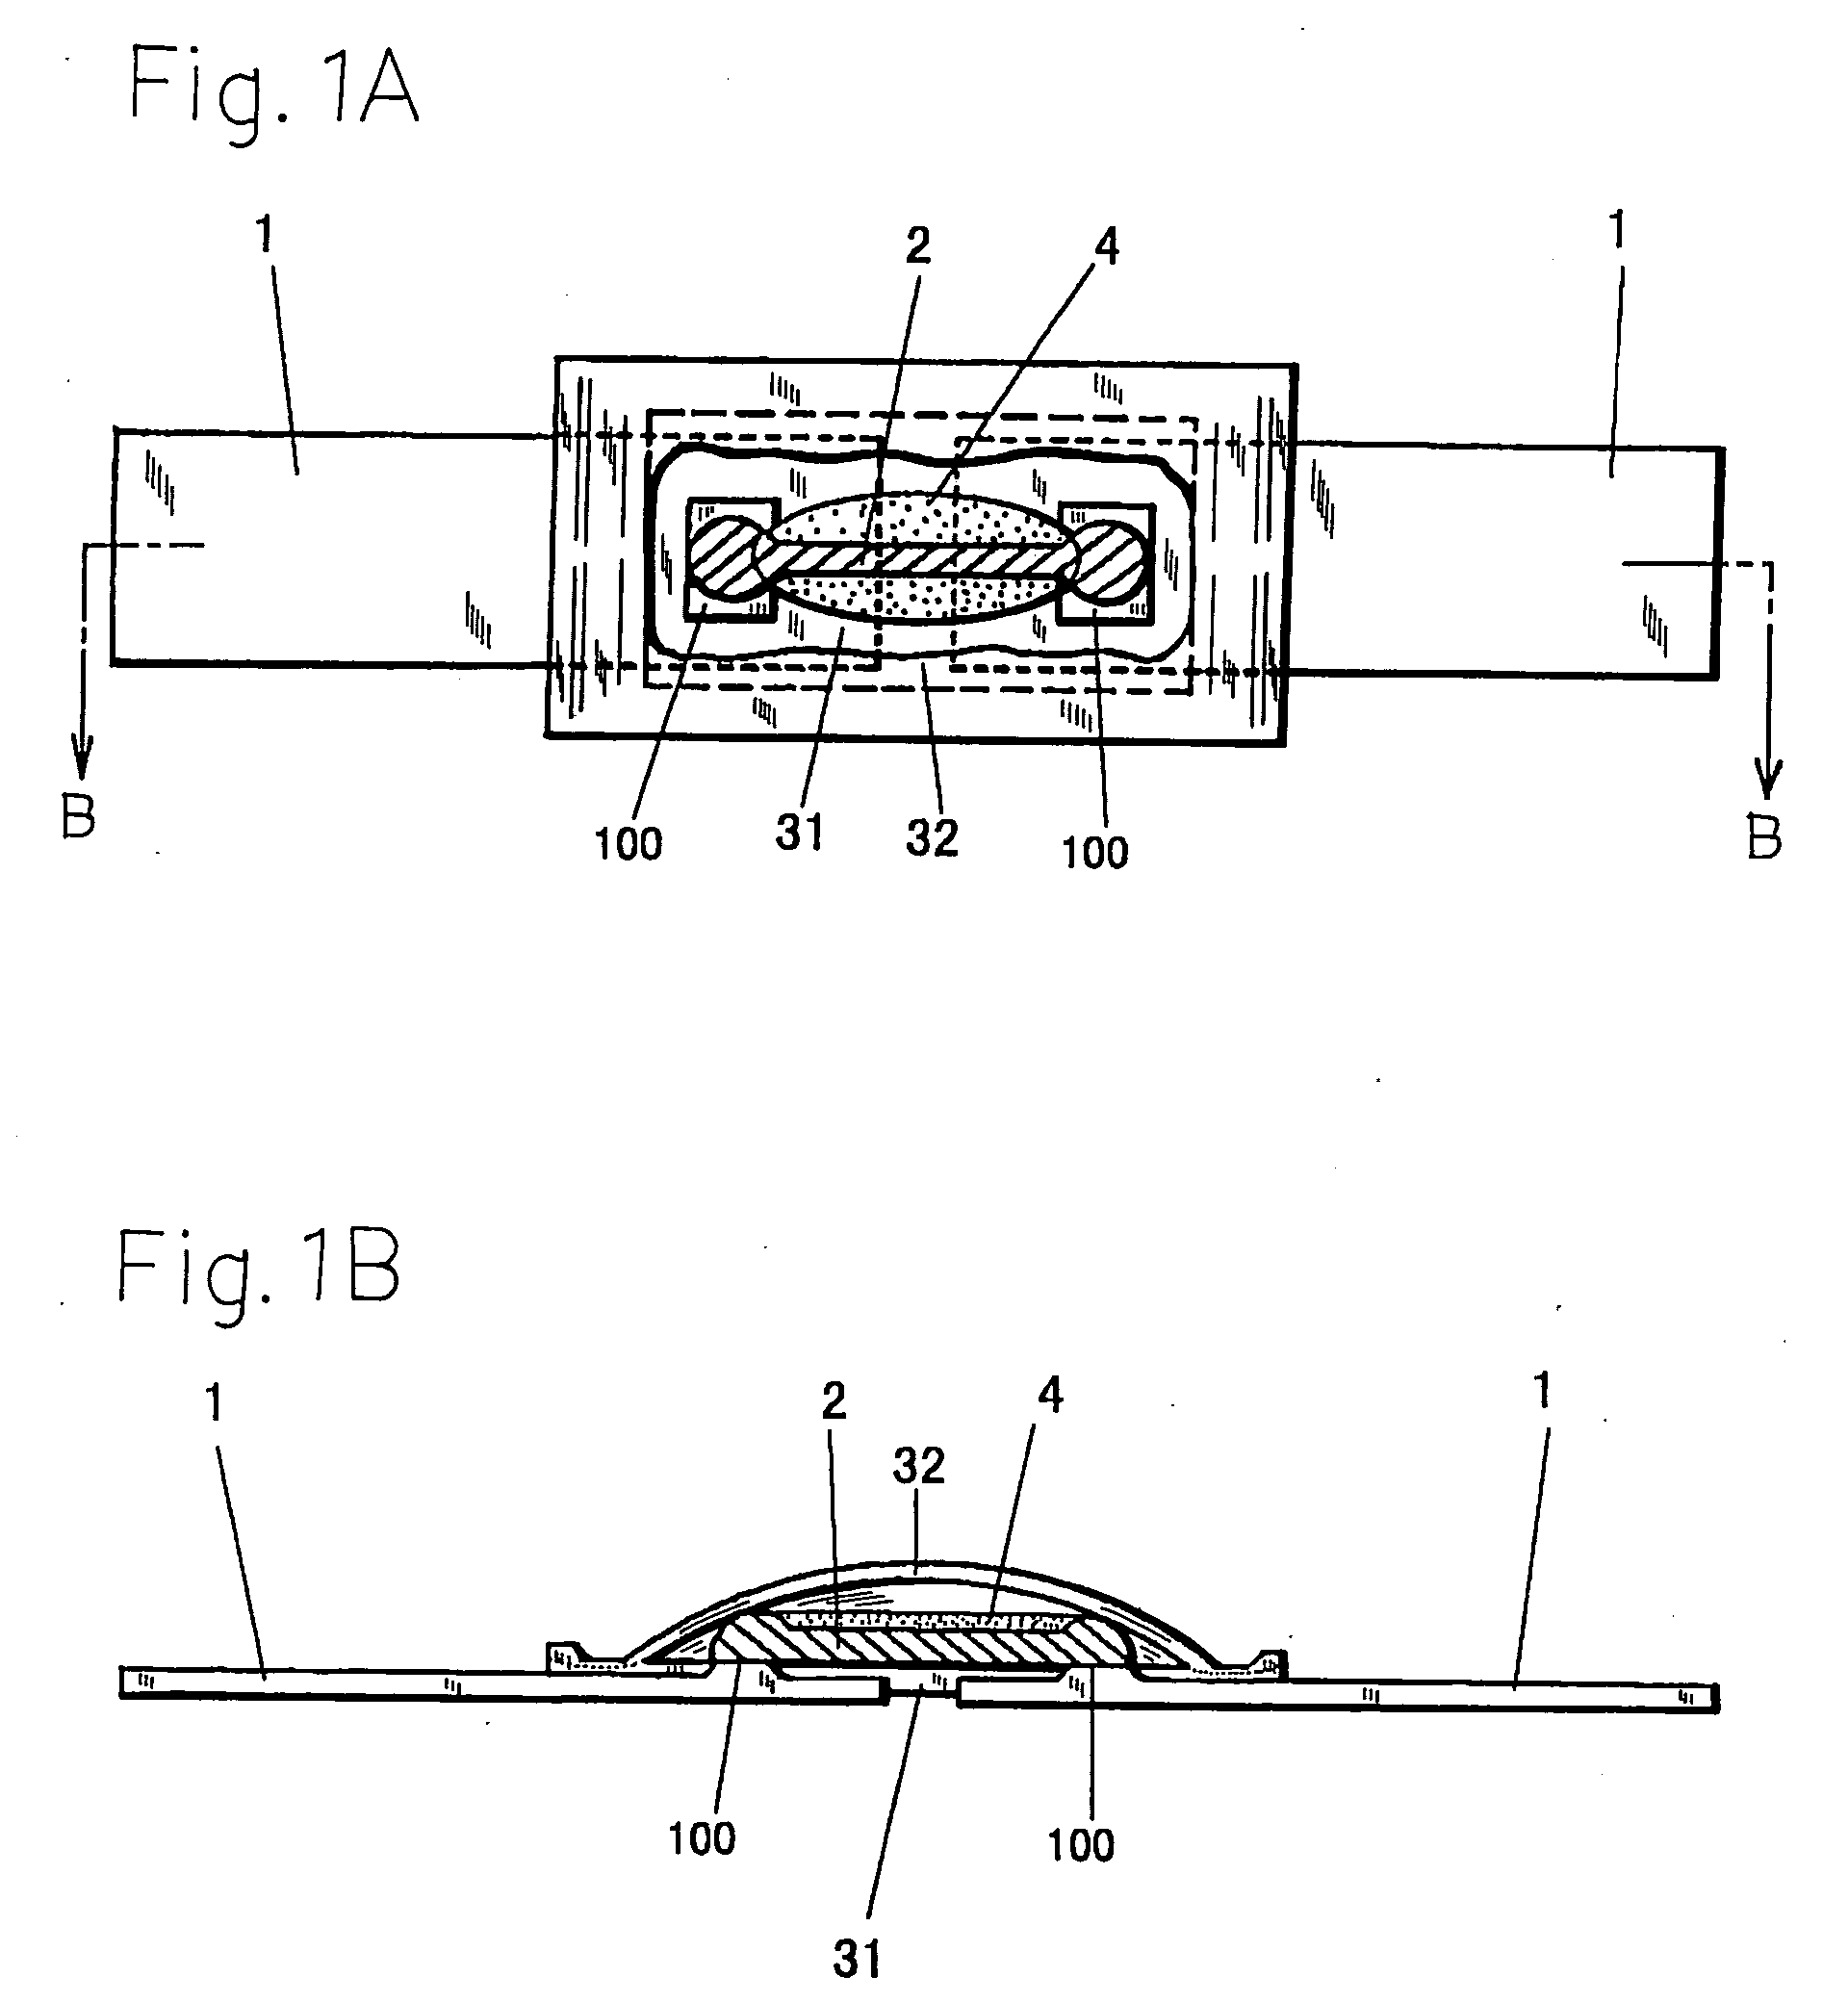 Thermal fuse having a function of a current fuse